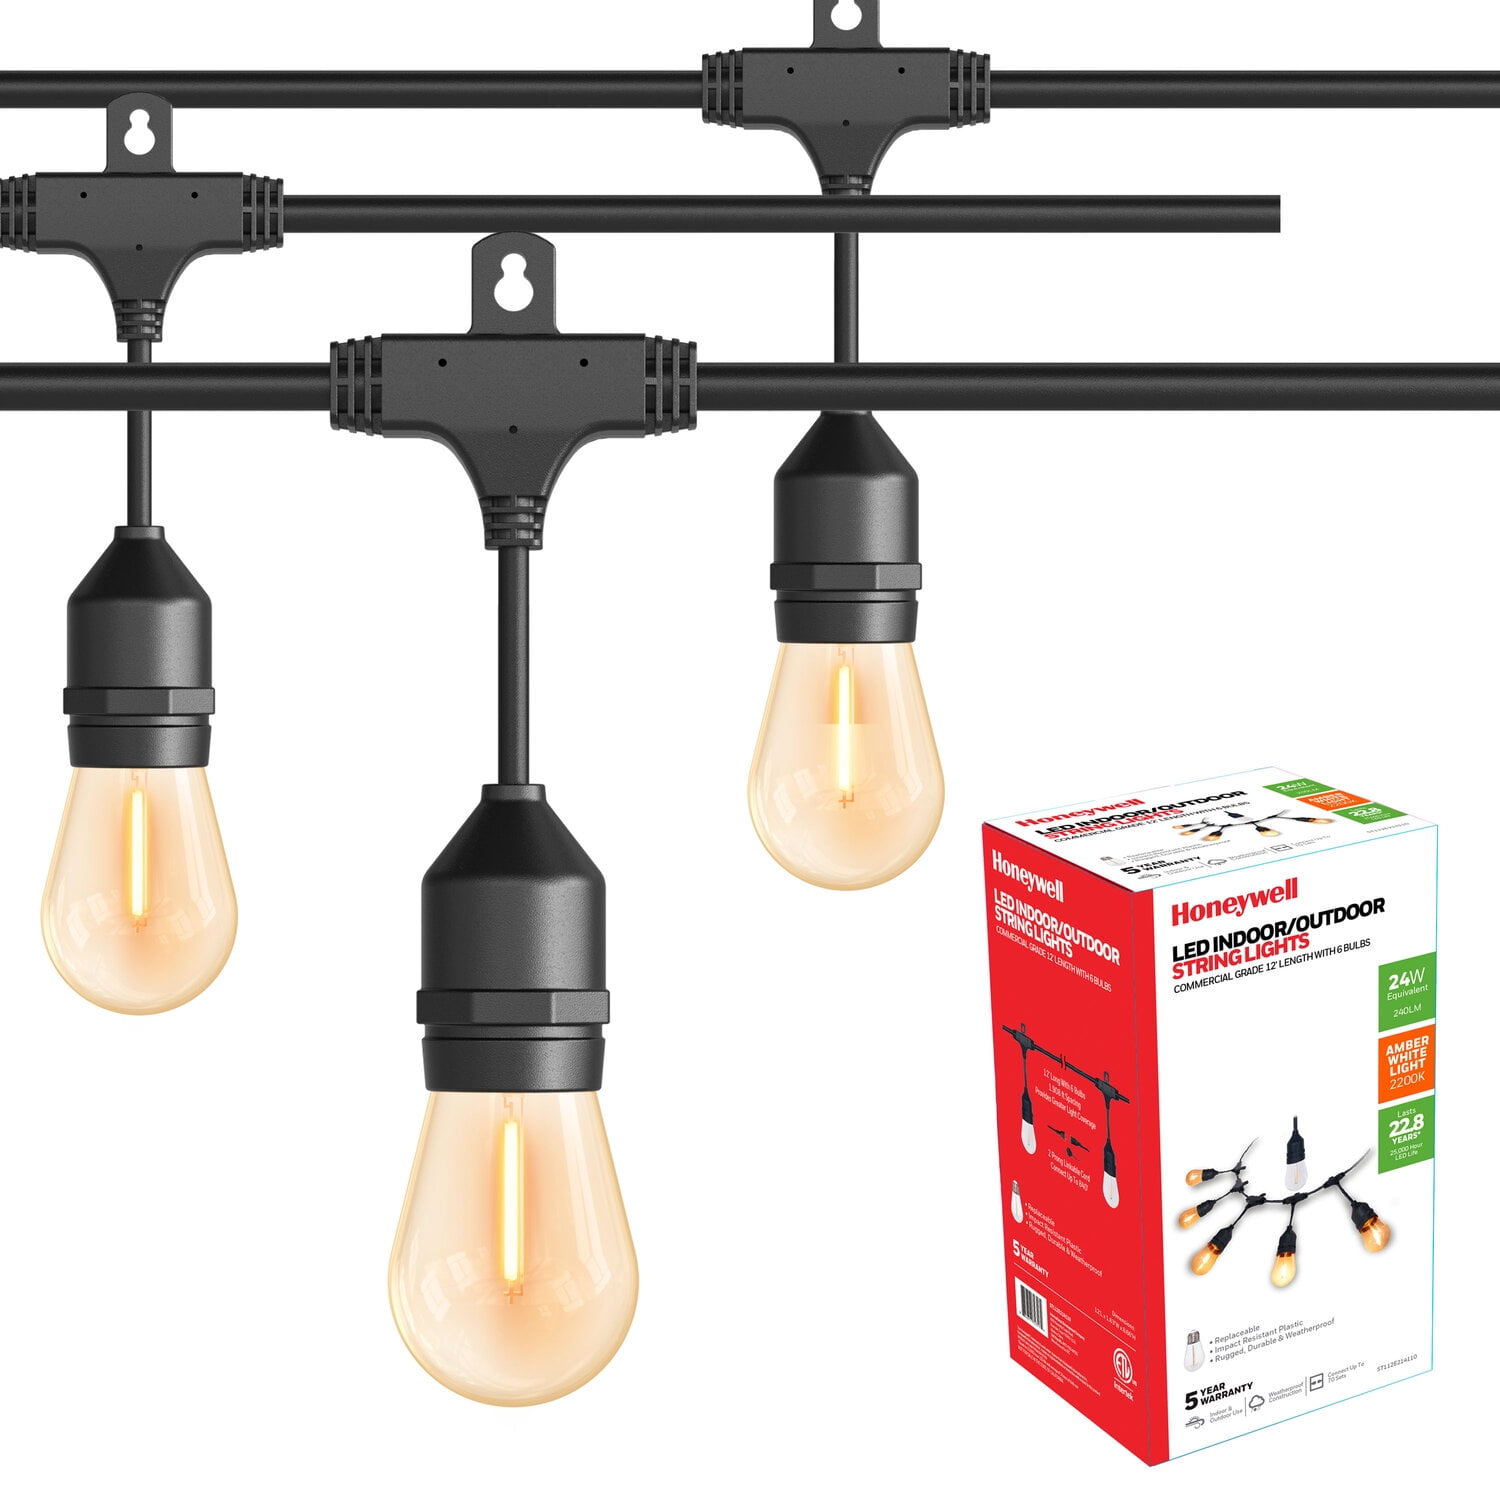 Honeywell 12' LED Indoor/Outdoor String Lights, 6 E26 Filament Bulbs Included, Warm White Light